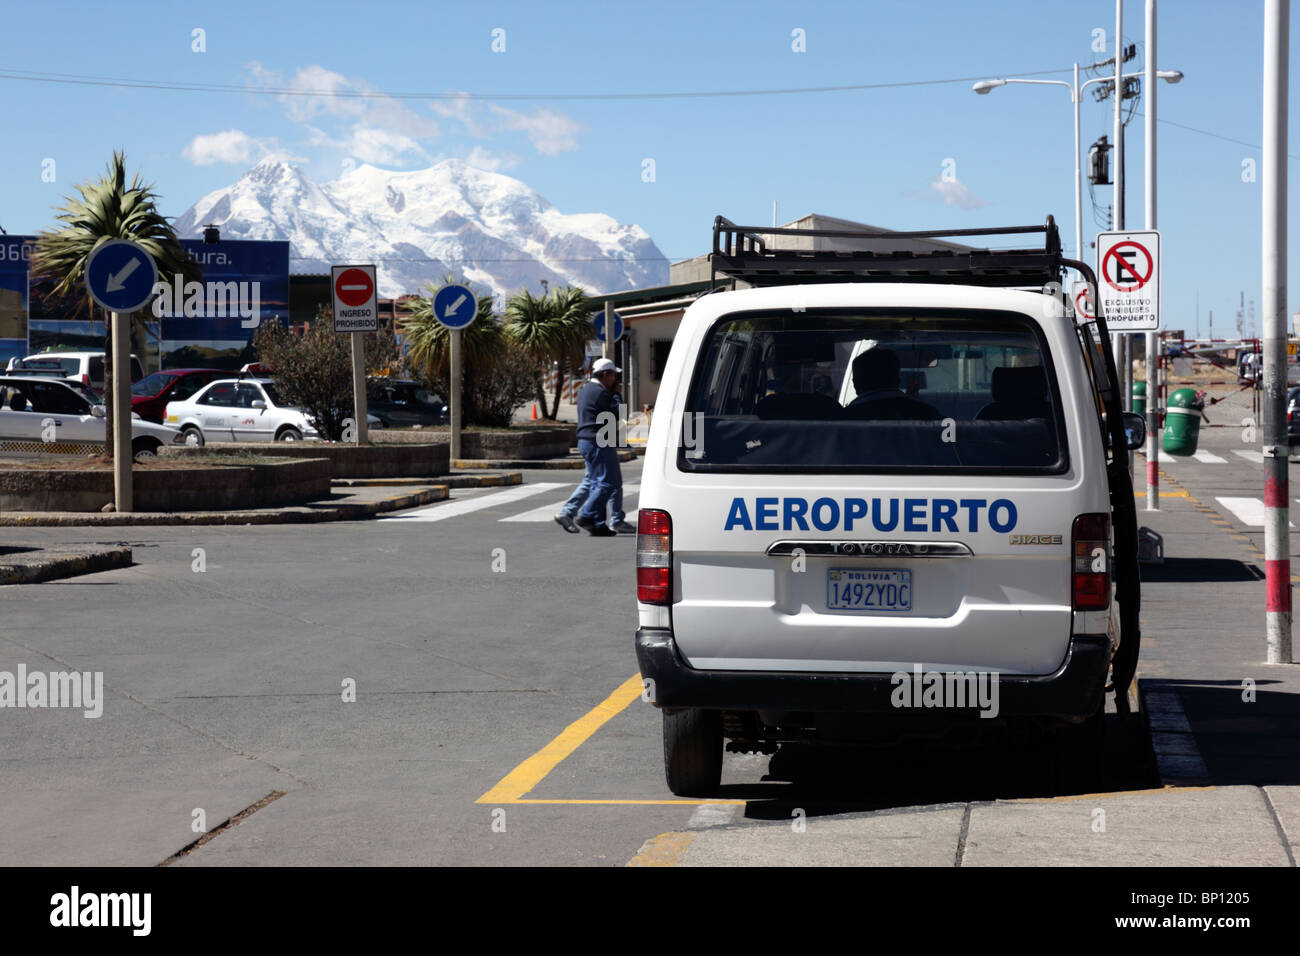 Official public transport minibus at El Alto airport (LPB, the highest international airport in the world), Mt Illimani in background, La Paz, Bolivia Stock Photo